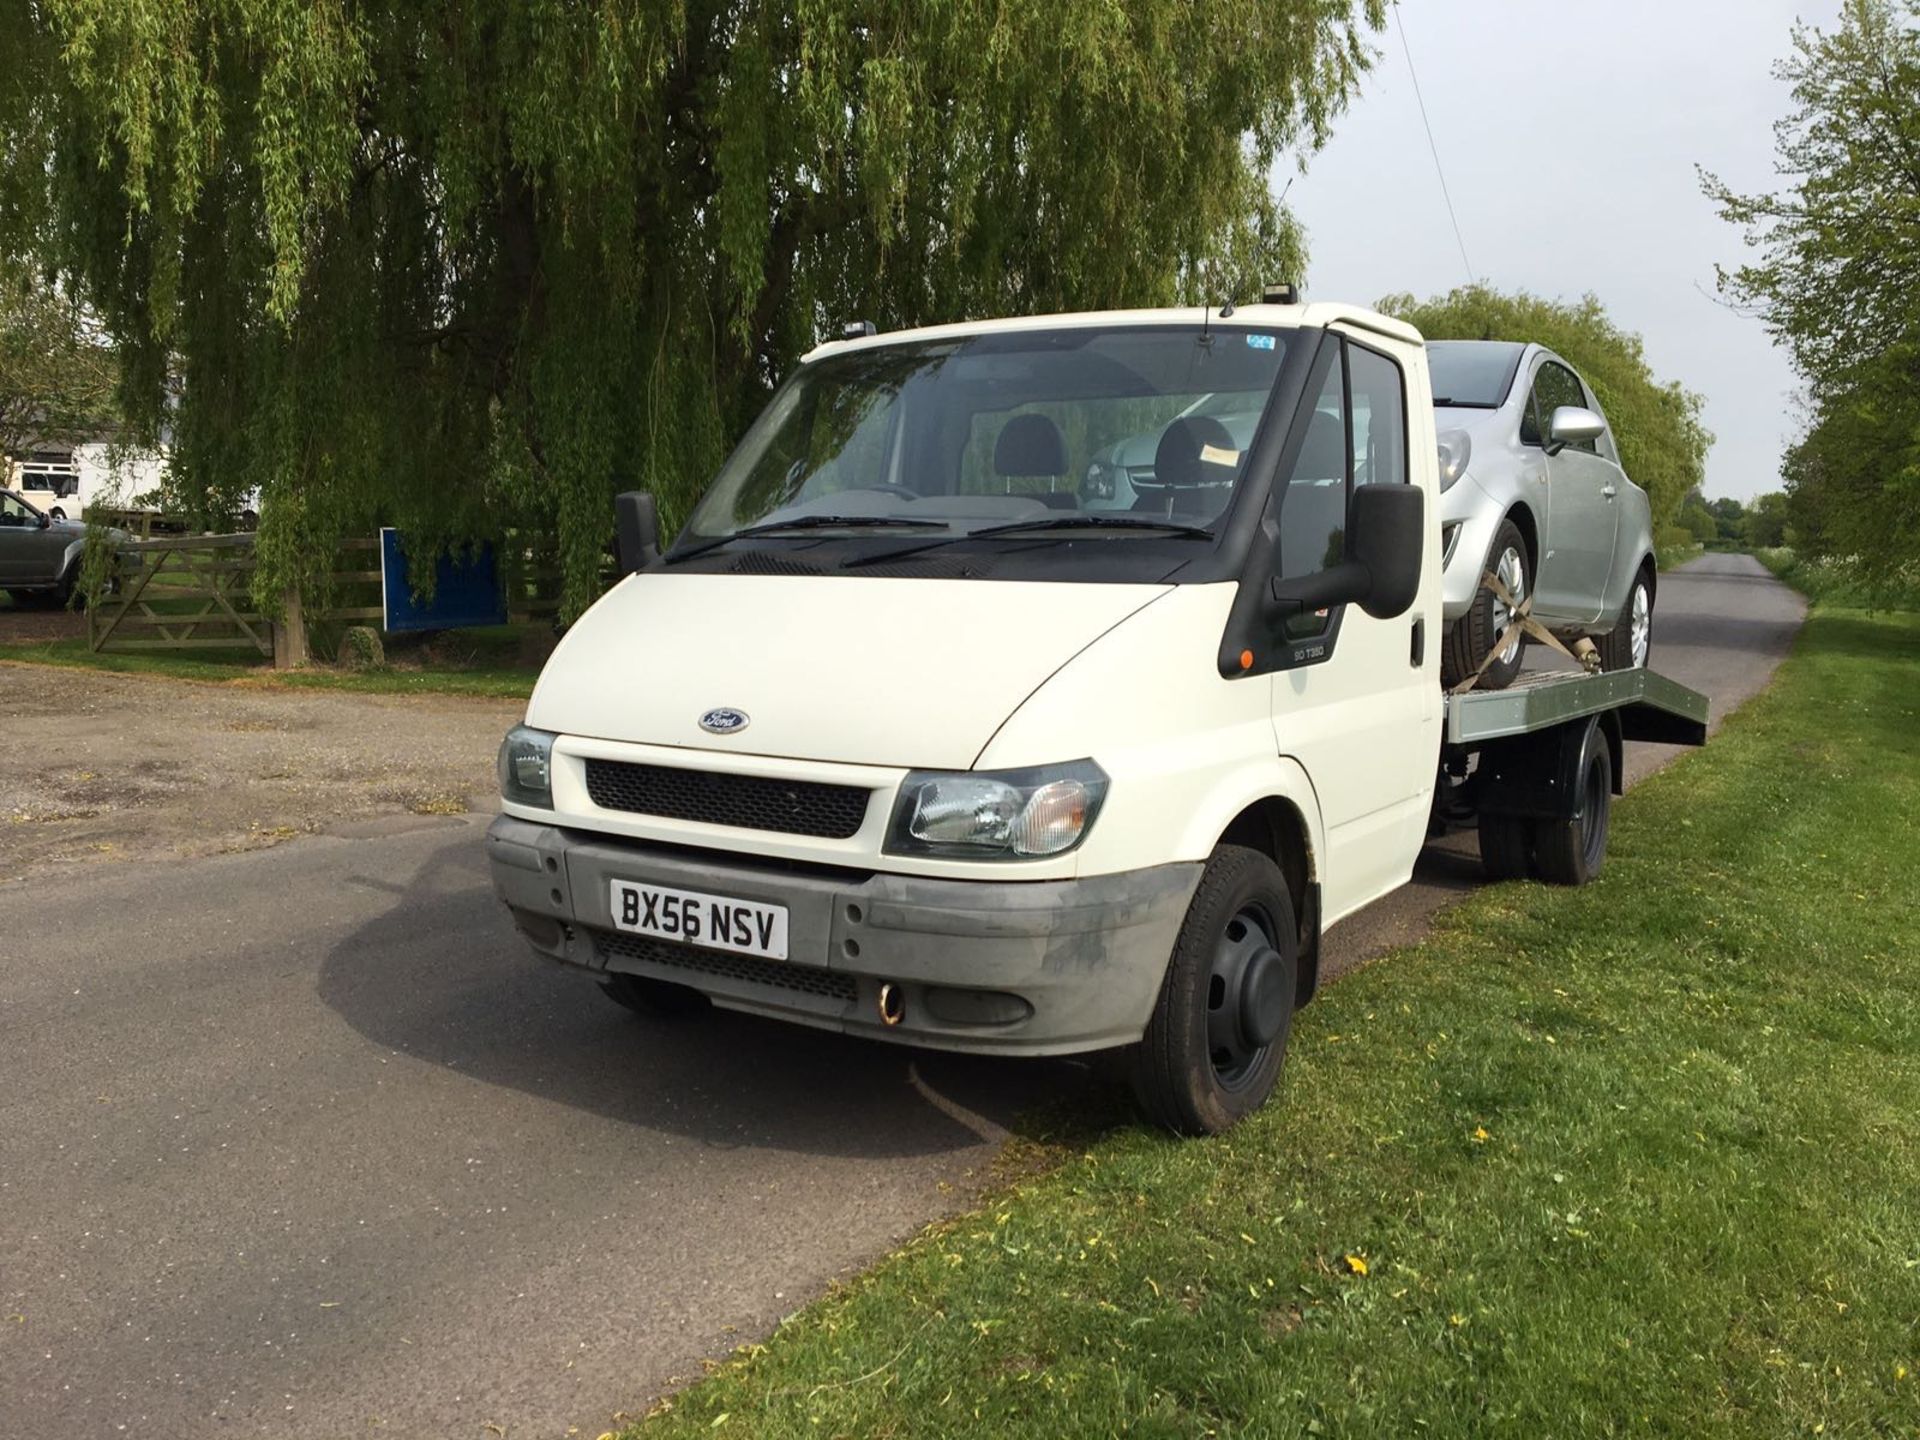 KB - 2006/56 REG FORD TRANSIT 350 MWB TD RECOVERY BEAVER TAIL VAN   DATE OF REGISTRATION: 24TH - Image 2 of 10